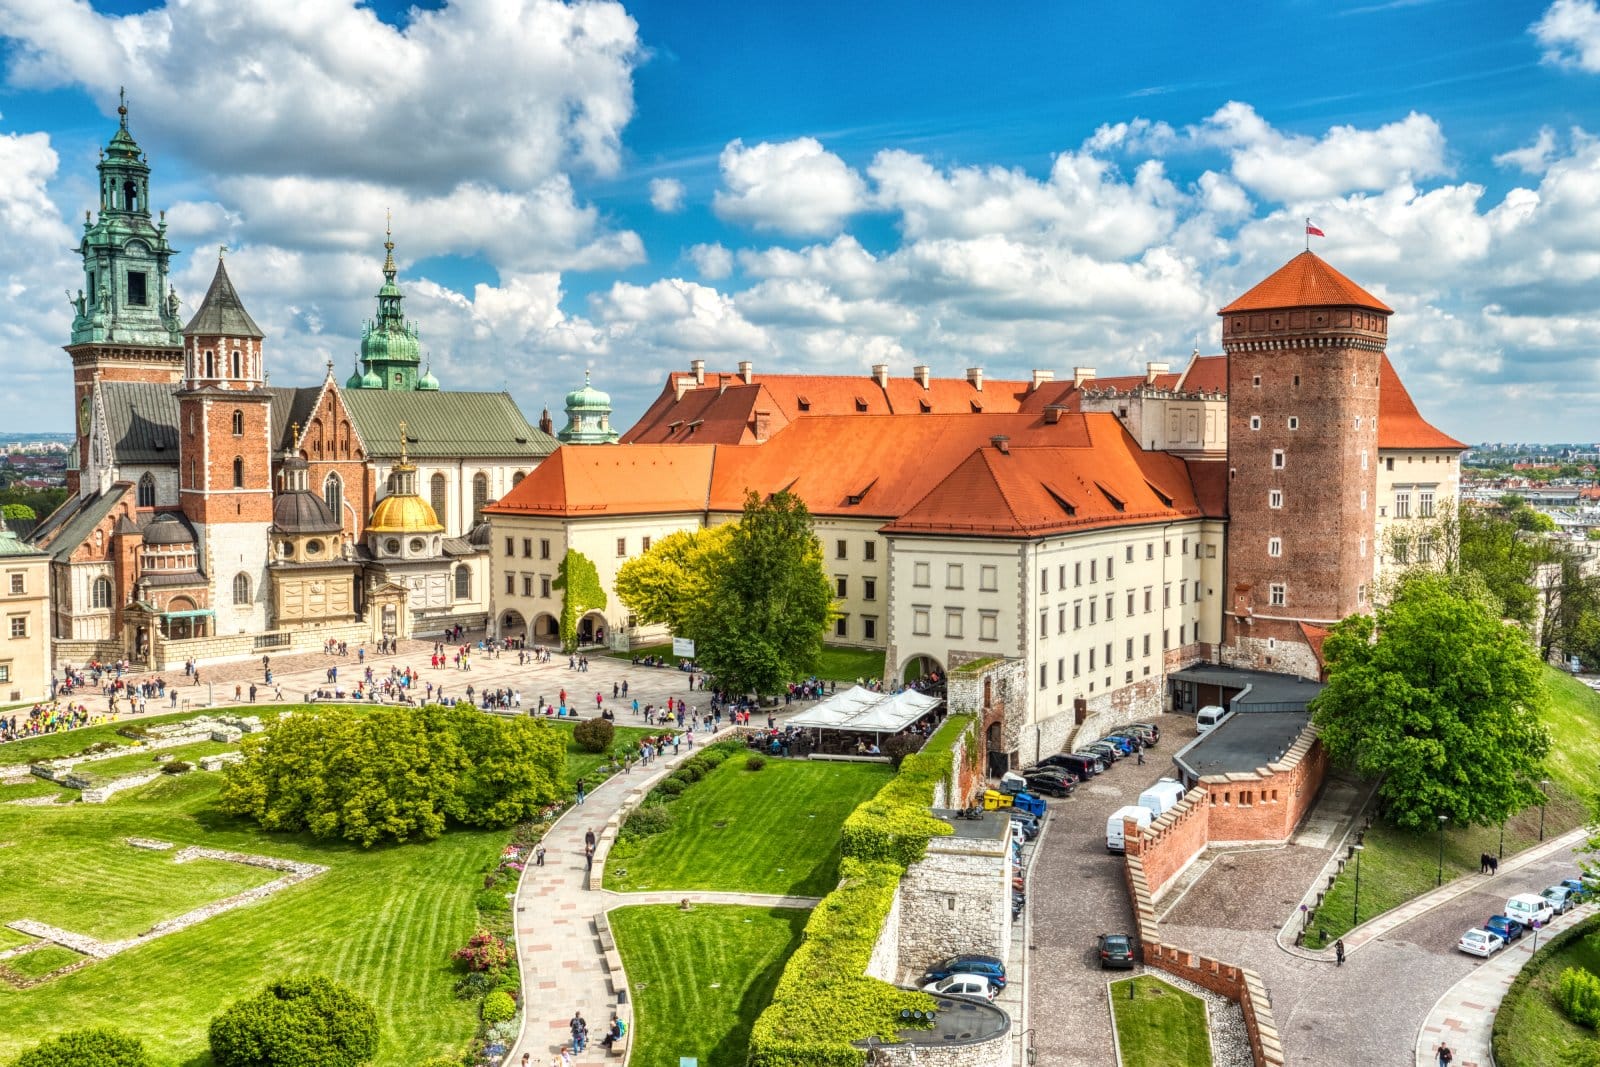 <p>Prepare to be enchanted by the medieval beauty of Krakow, Poland! With affordable rent prices averaging around $500 to $700 per month for a one-bedroom apartment, you can embrace the charm of Krakow without burning a hole in your pocket.</p>